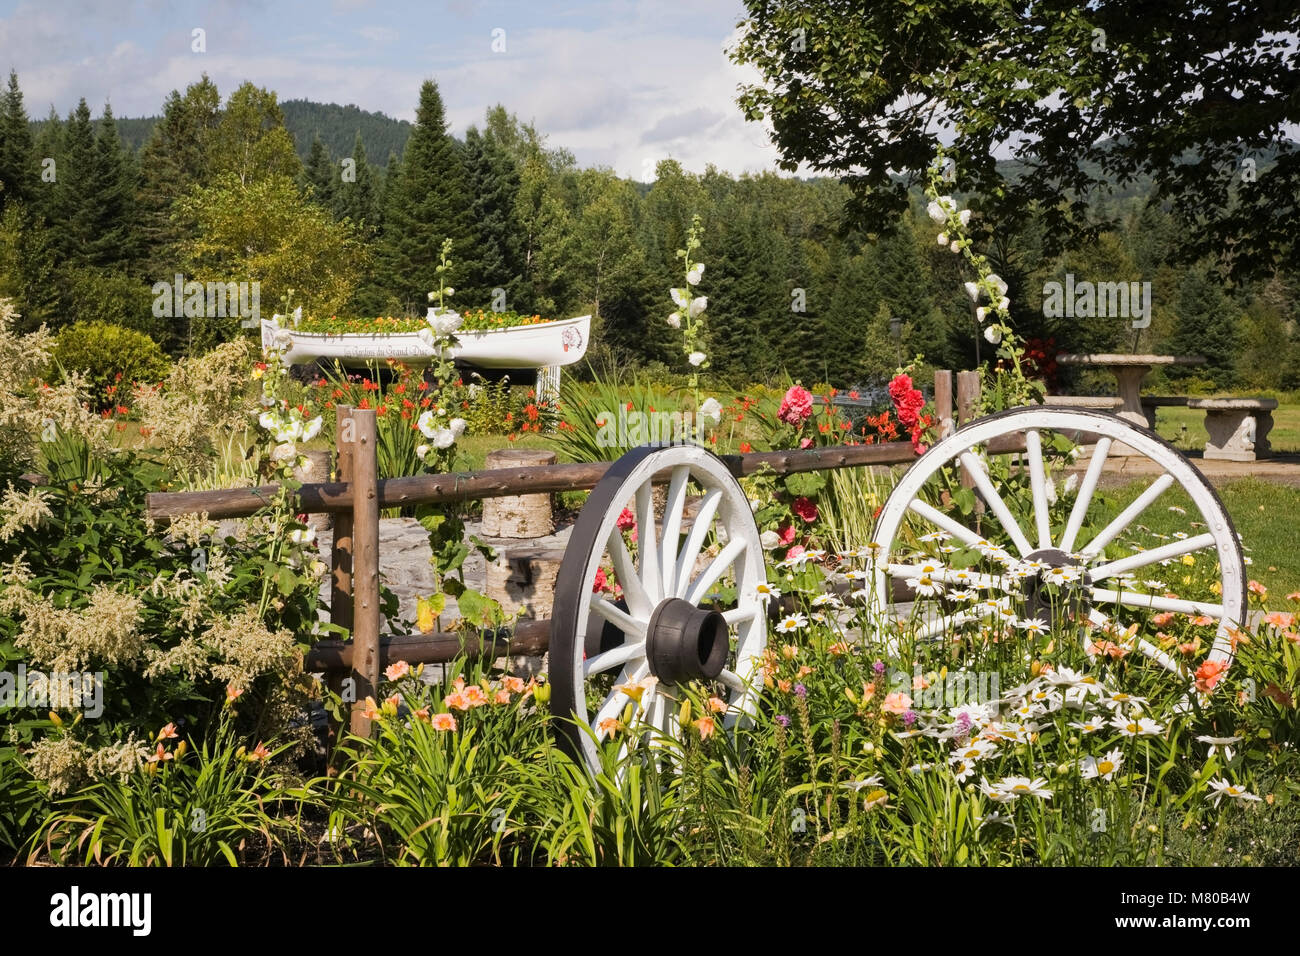 Wagon wheels and flowers in a garden border in a landscaped residential backyard garden in summer. Stock Photo